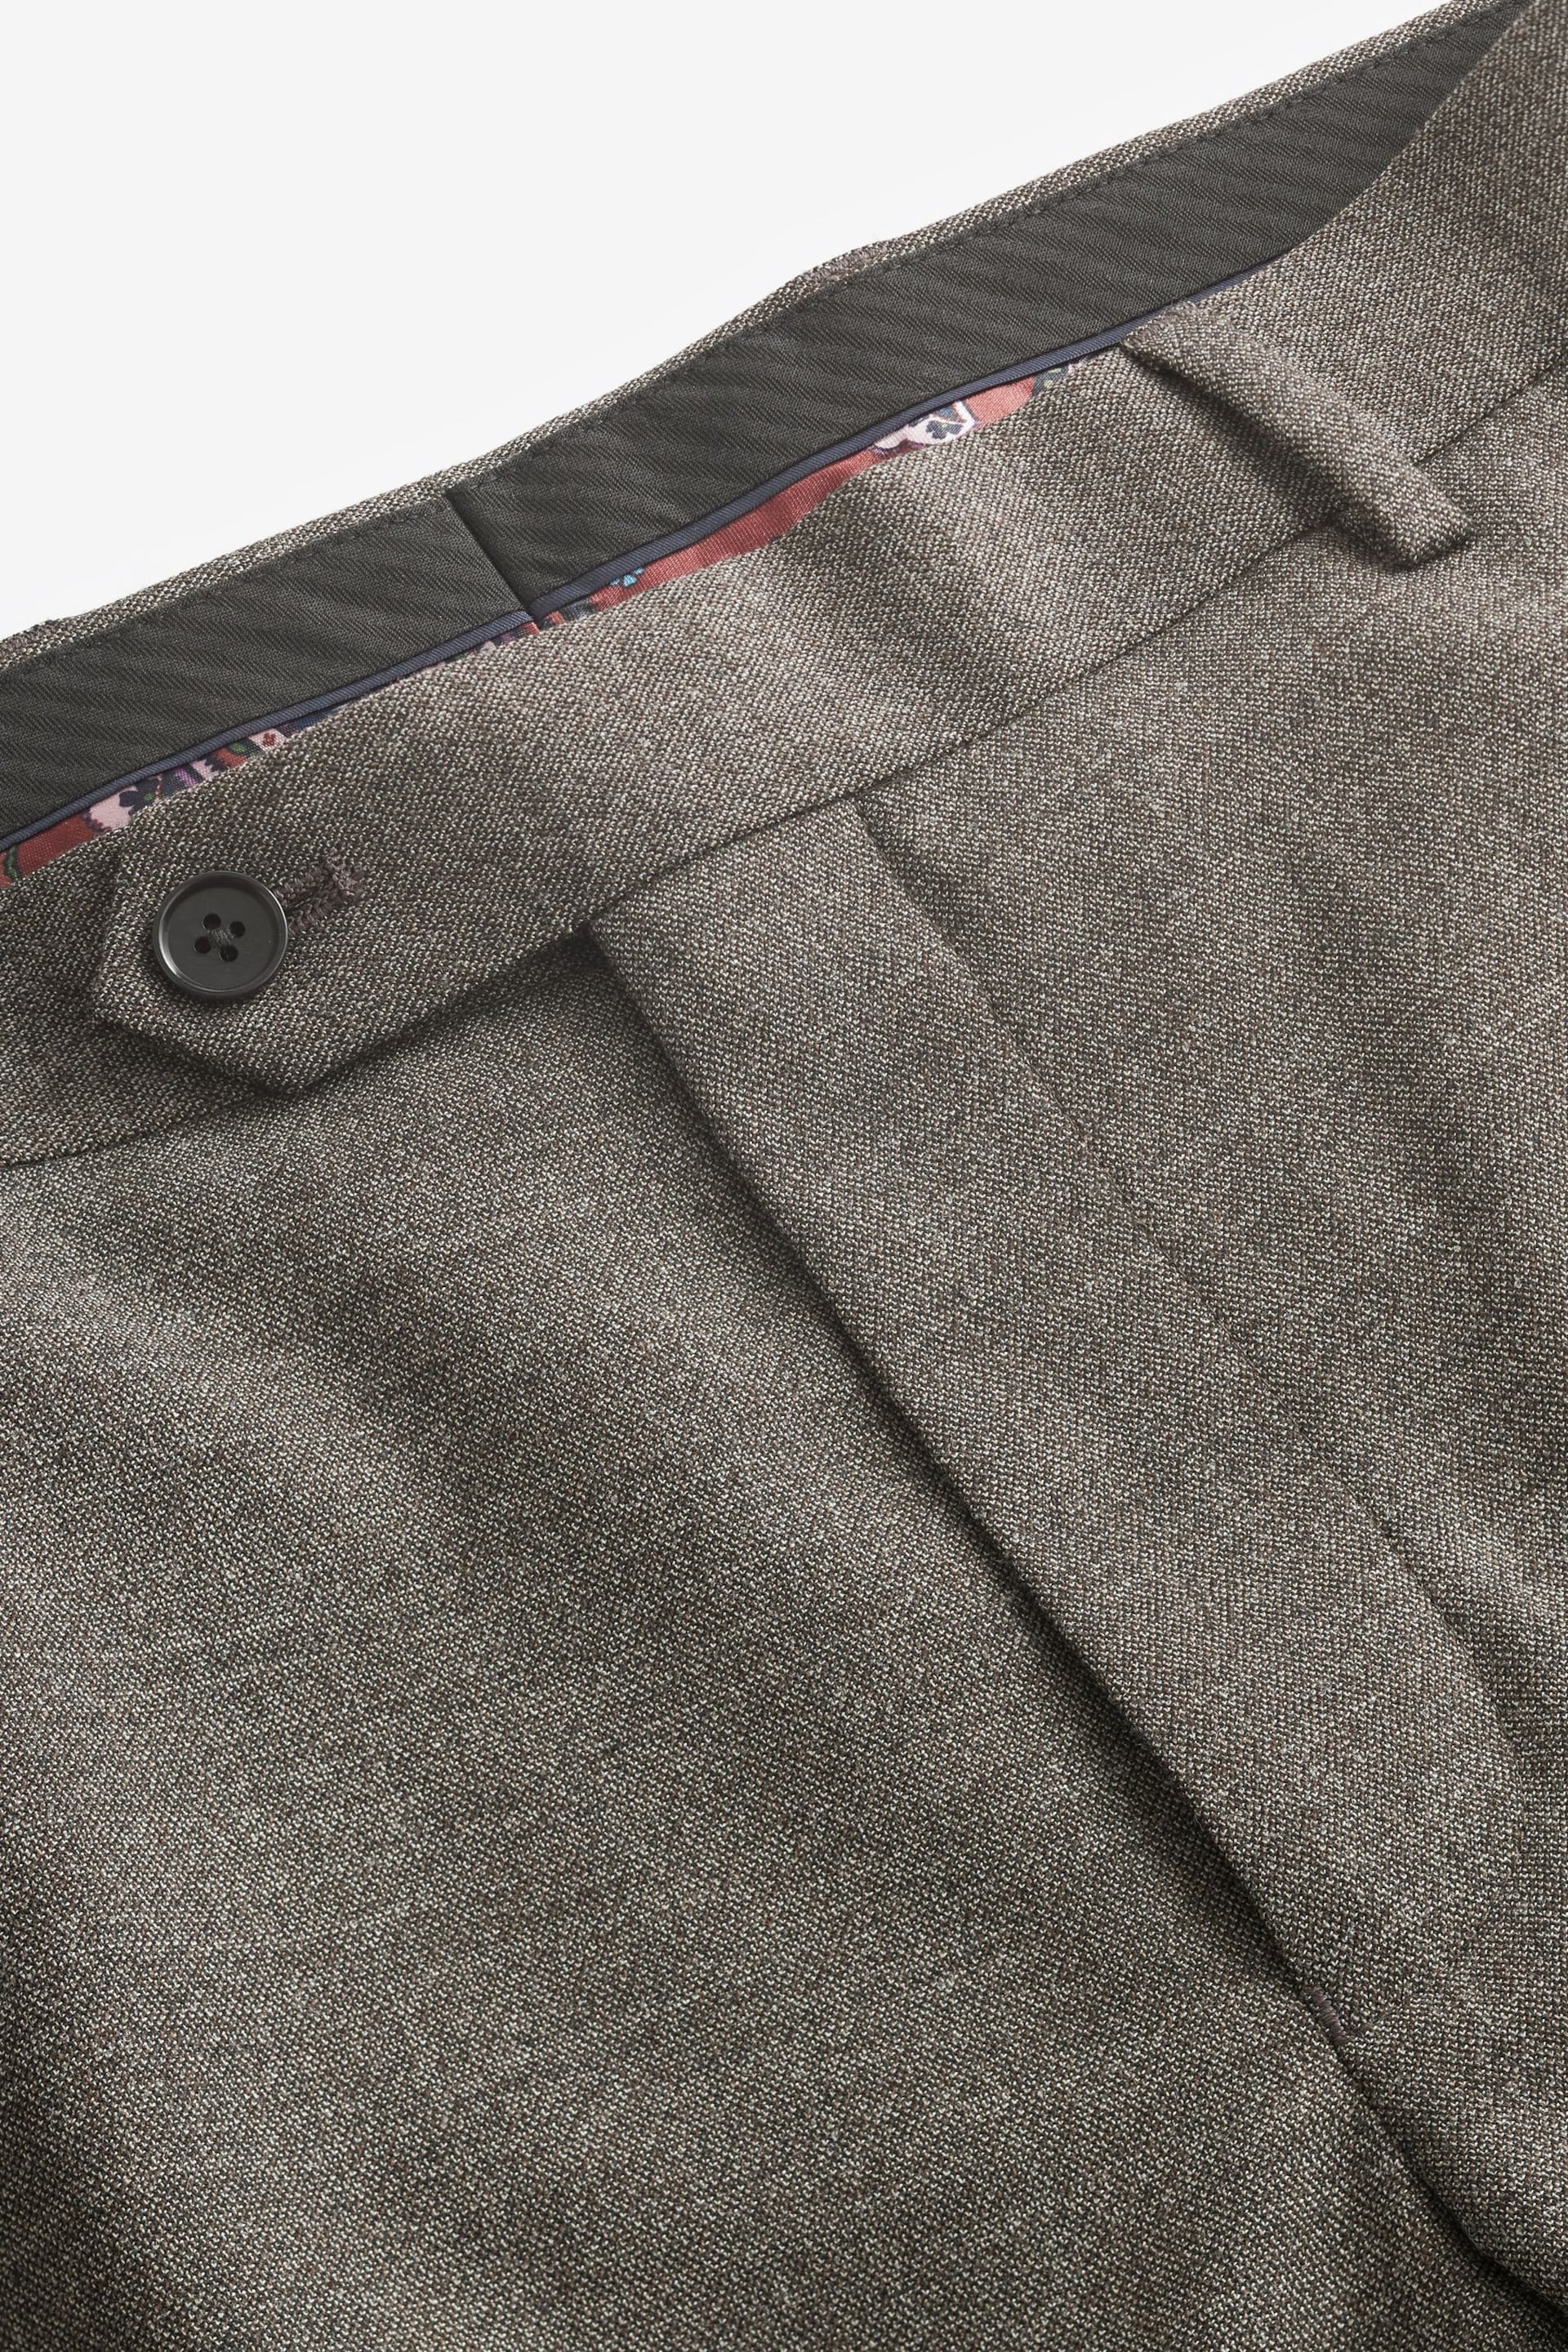 Taupe Slim Wool Blend Textured Suit: Trousers - Image 8 of 11